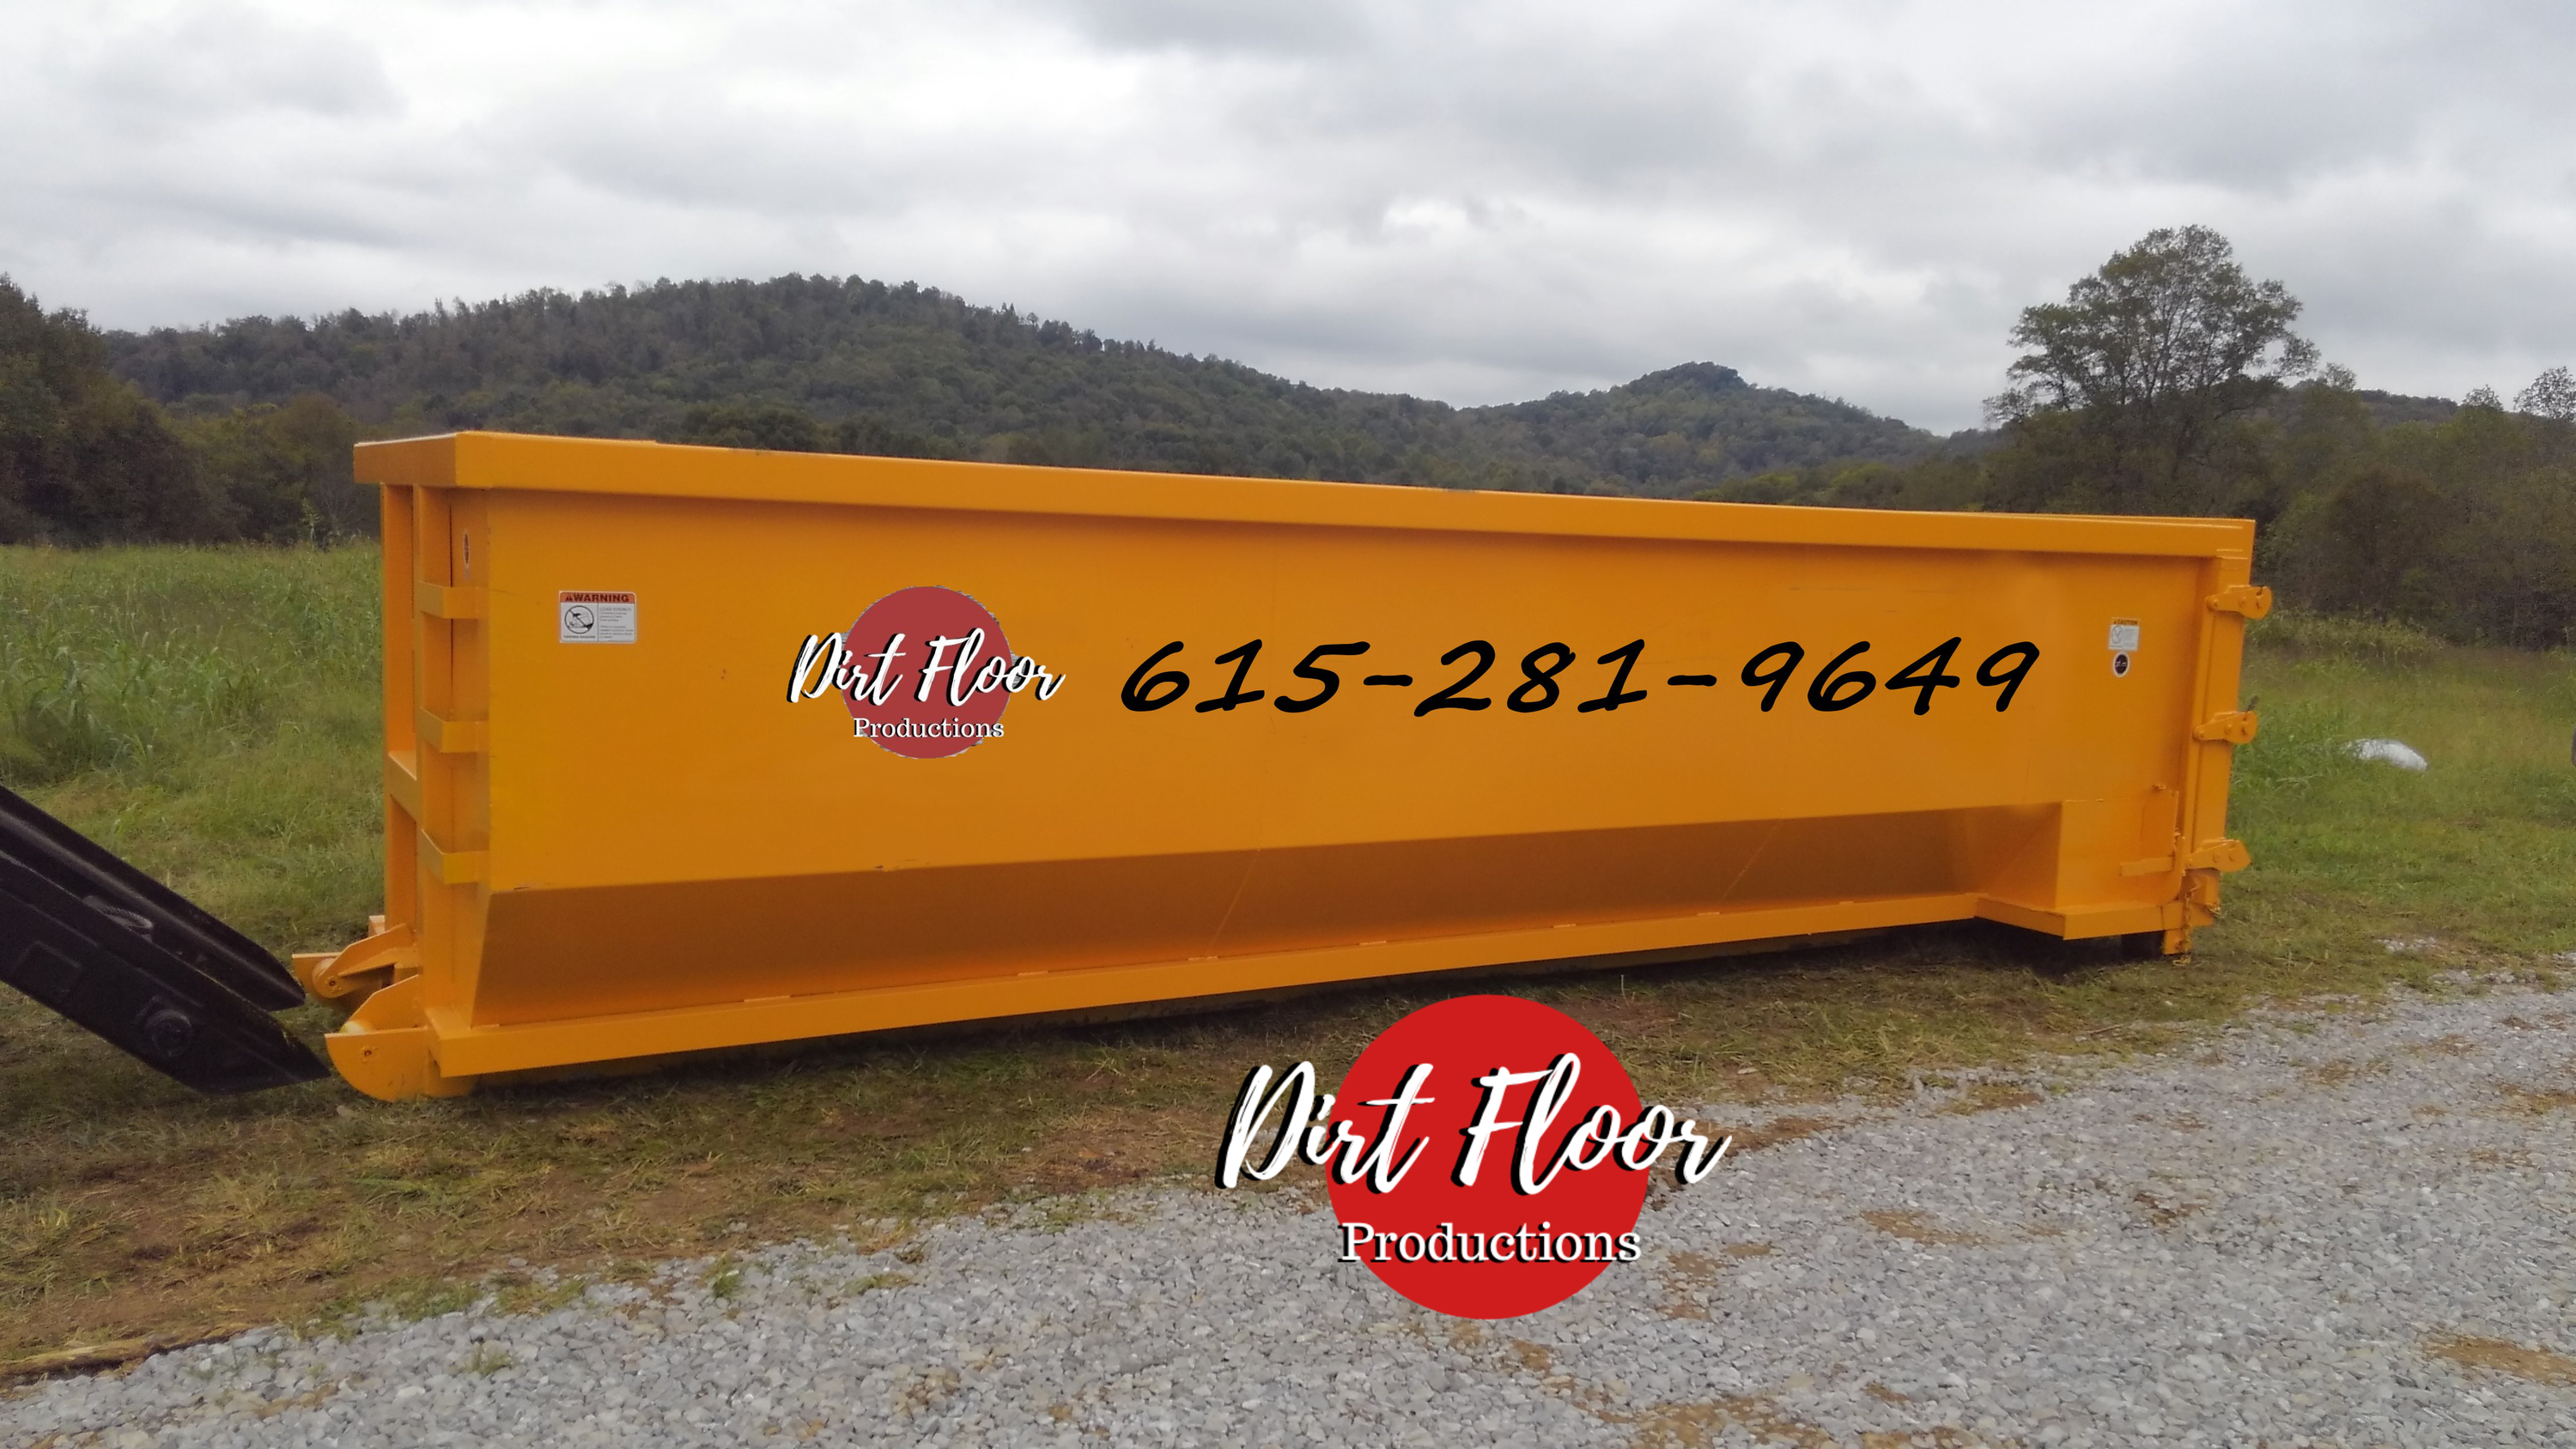 Residential Dumpster Rental Dirt Floor Productions Silver Point Tennessee